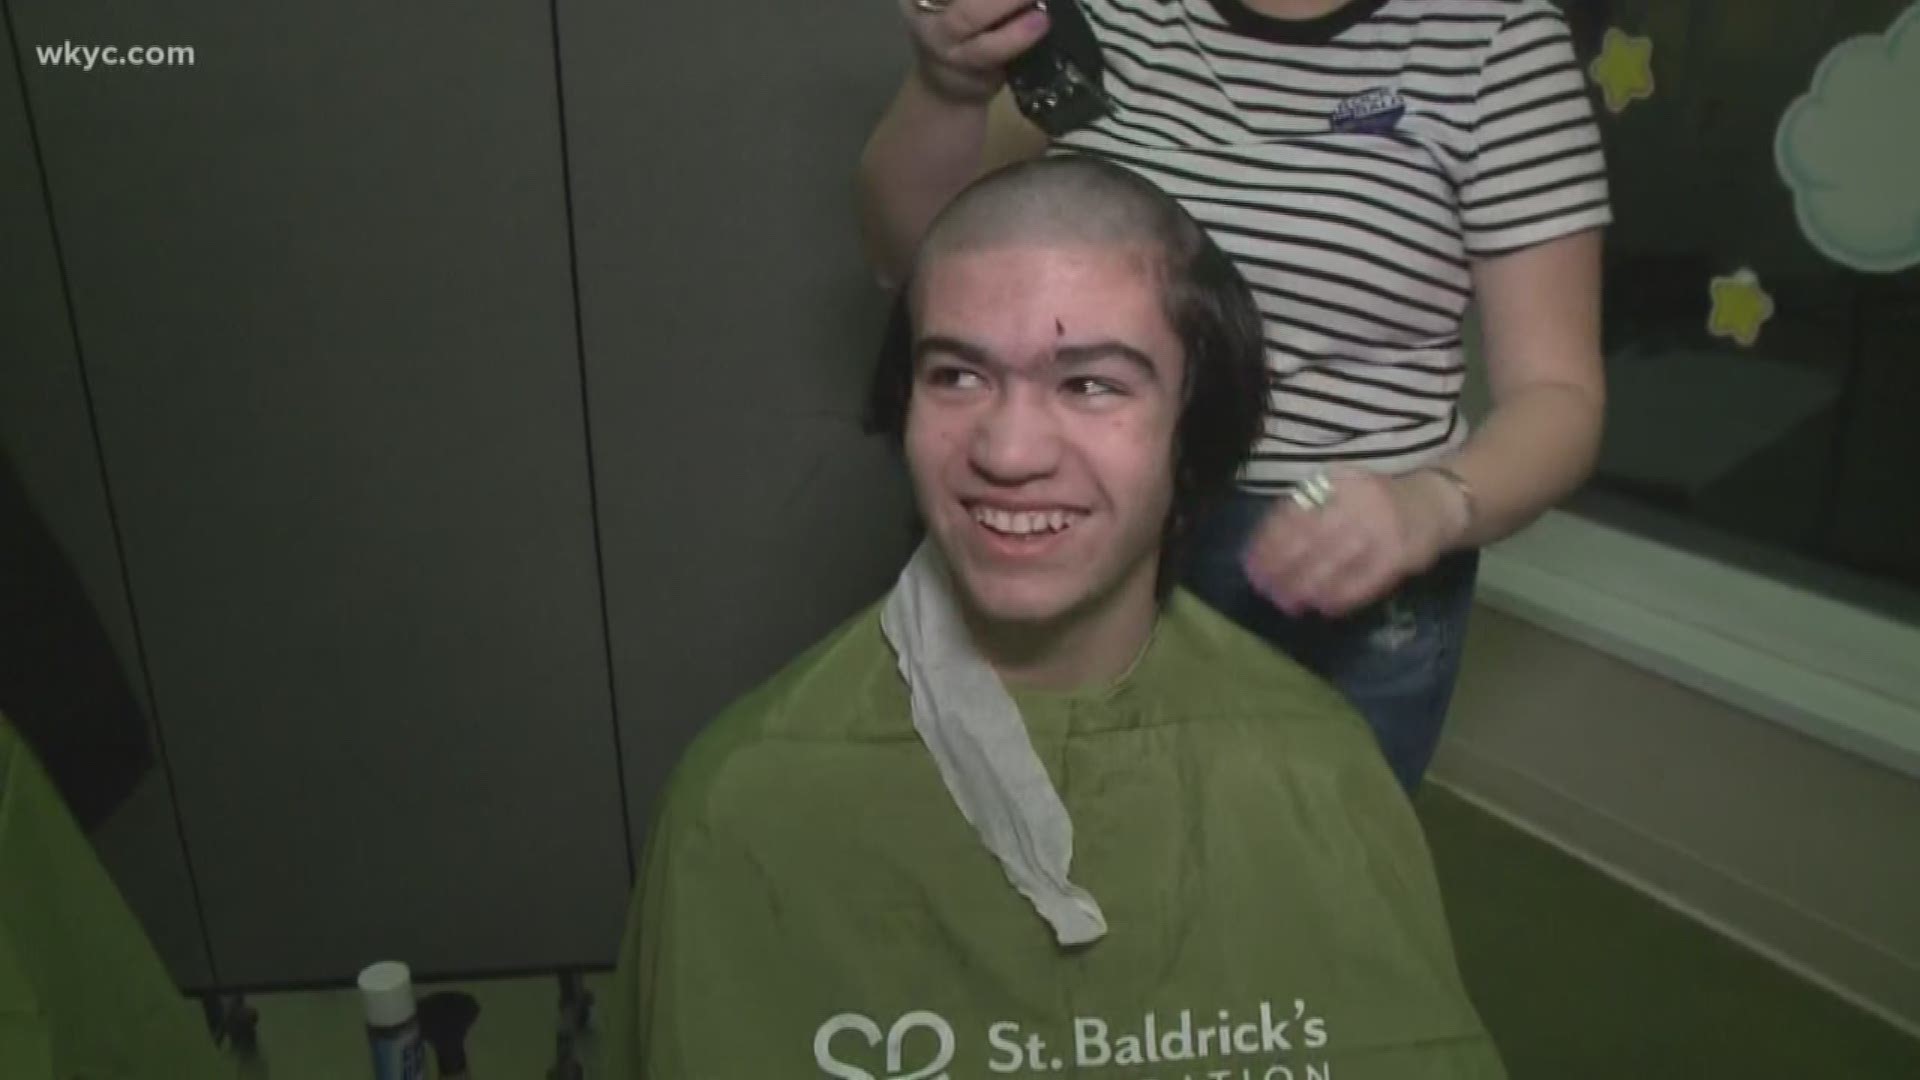 March 6, 2020: You're going to see more bald heads throughout Northeast Ohio. That's because St. Baldrick's events are underway to raise money for cancer.